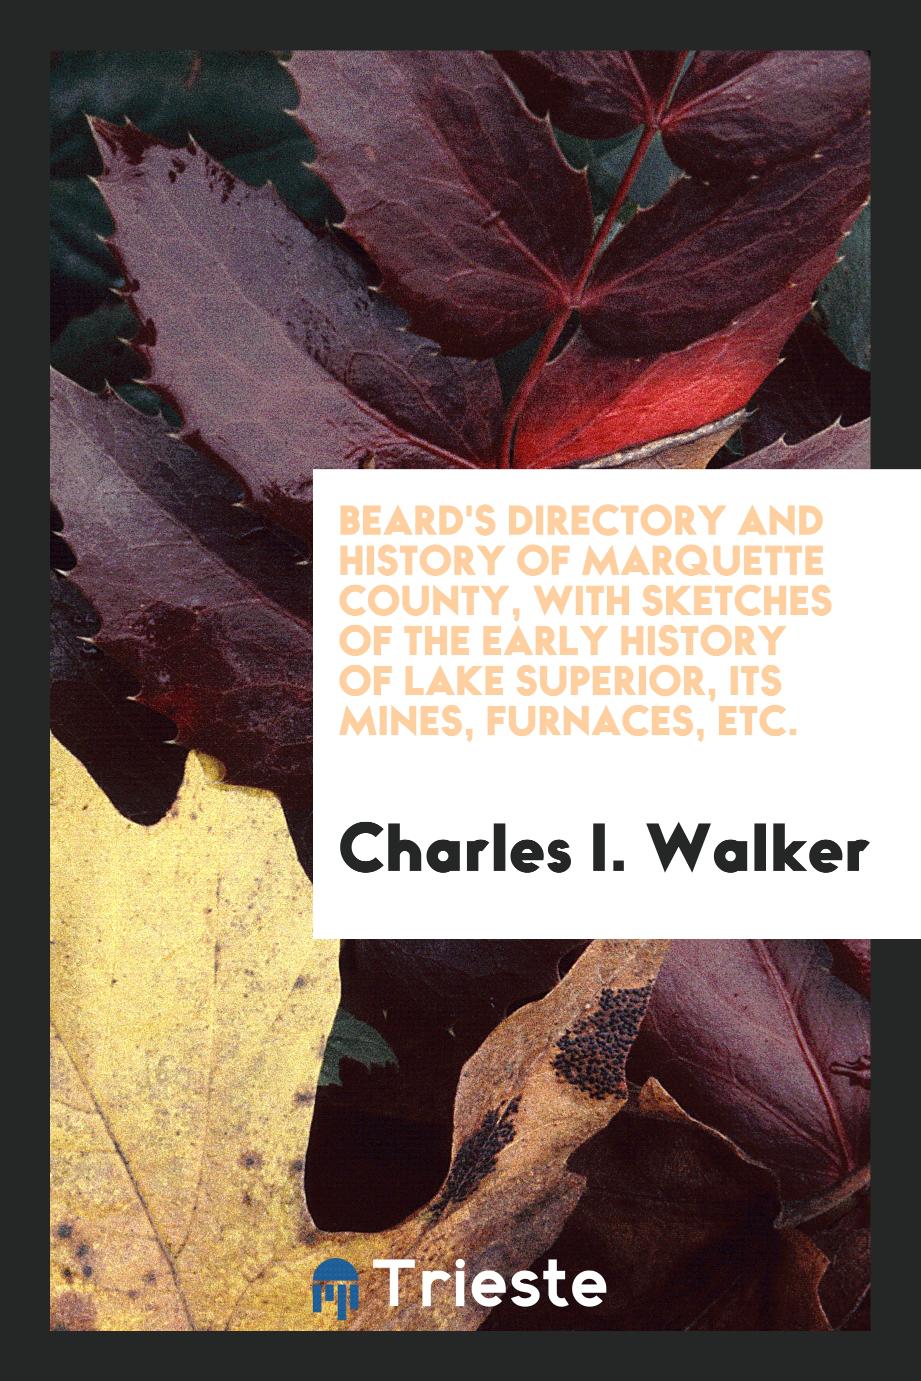 Beard's Directory and History of Marquette County, with Sketches of the Early History of Lake Superior, Its Mines, Furnaces, Etc.